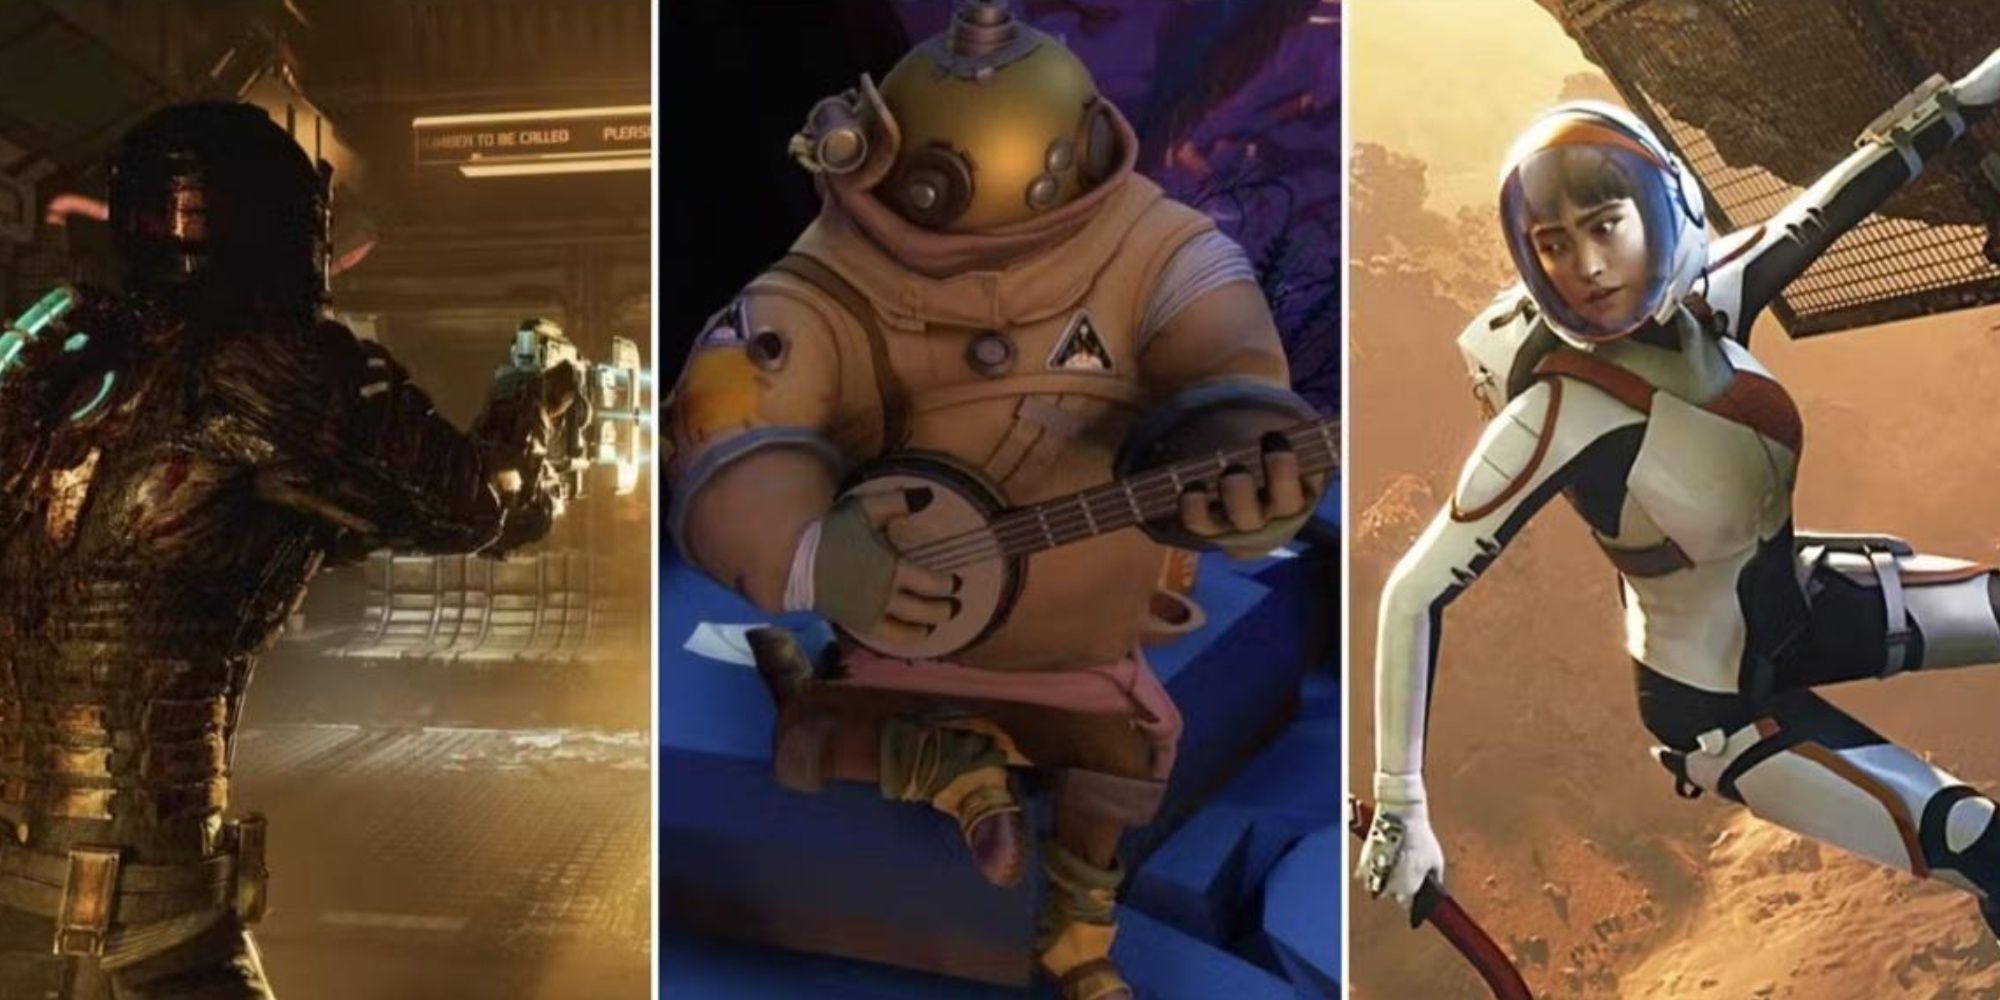 Dead Space, Outer Wilds, and Deliver Us Mars